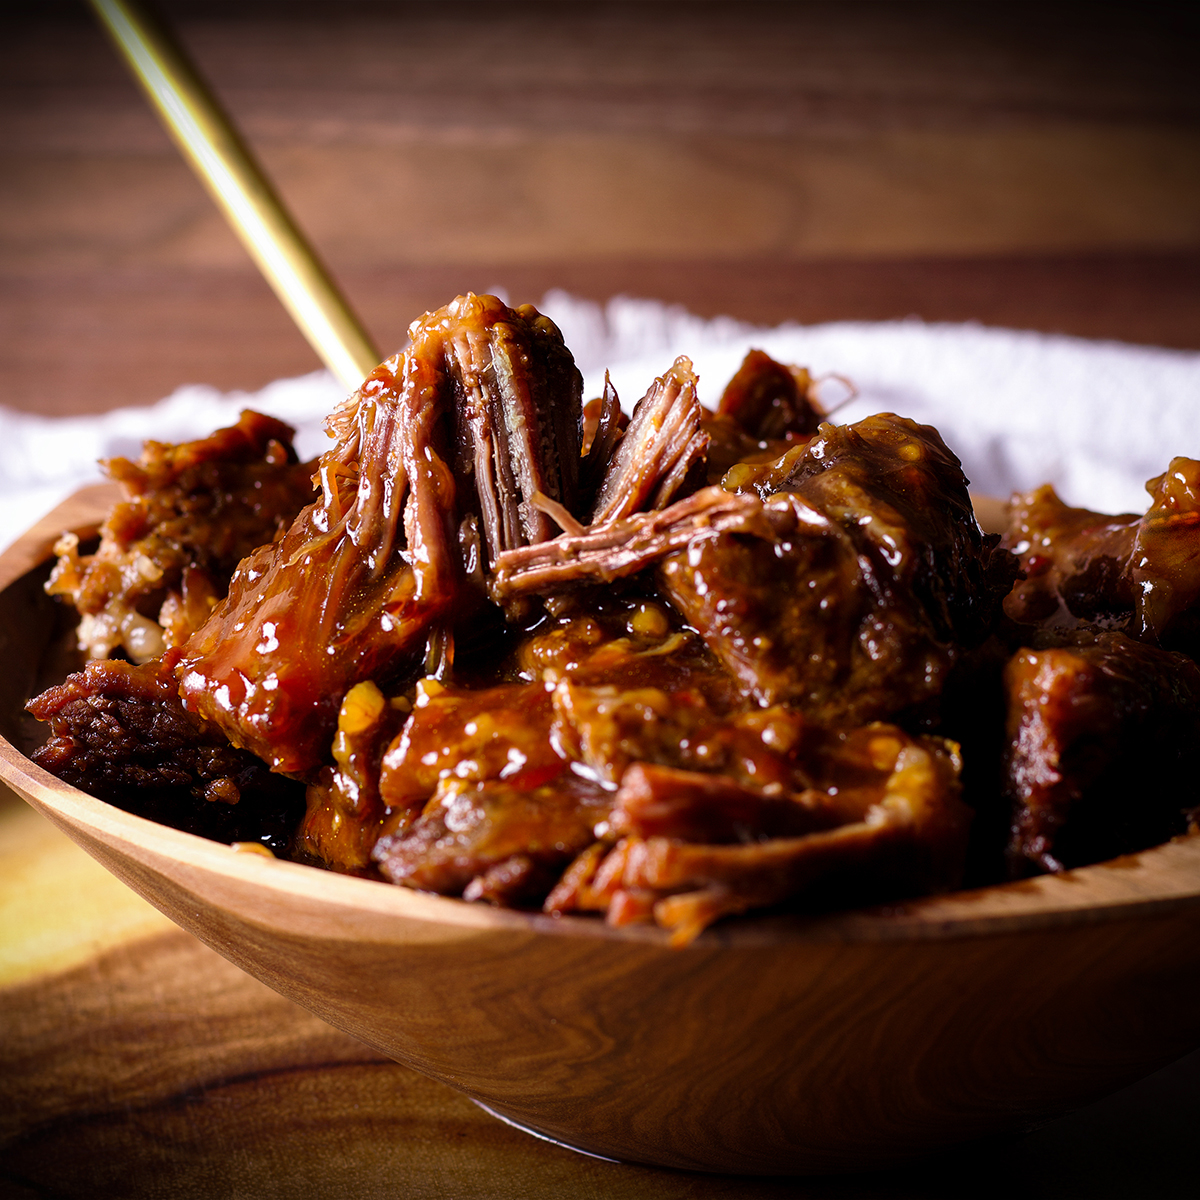 A wood bowl filled with warm, tender Asian Short Ribs.